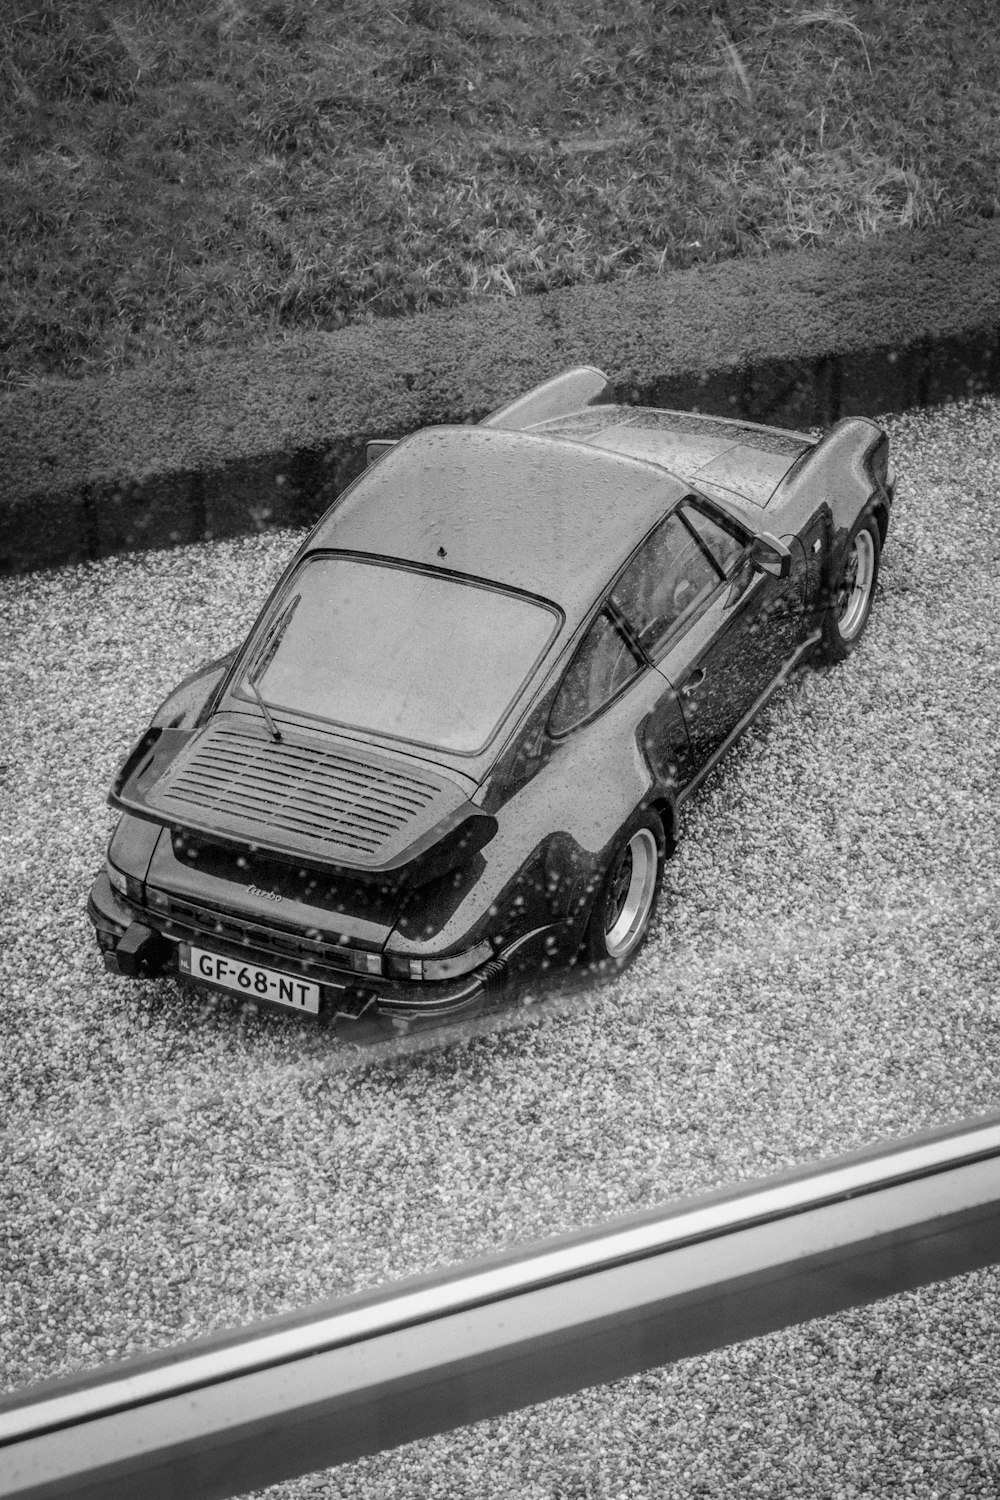 a black and white photo of a car parked in gravel